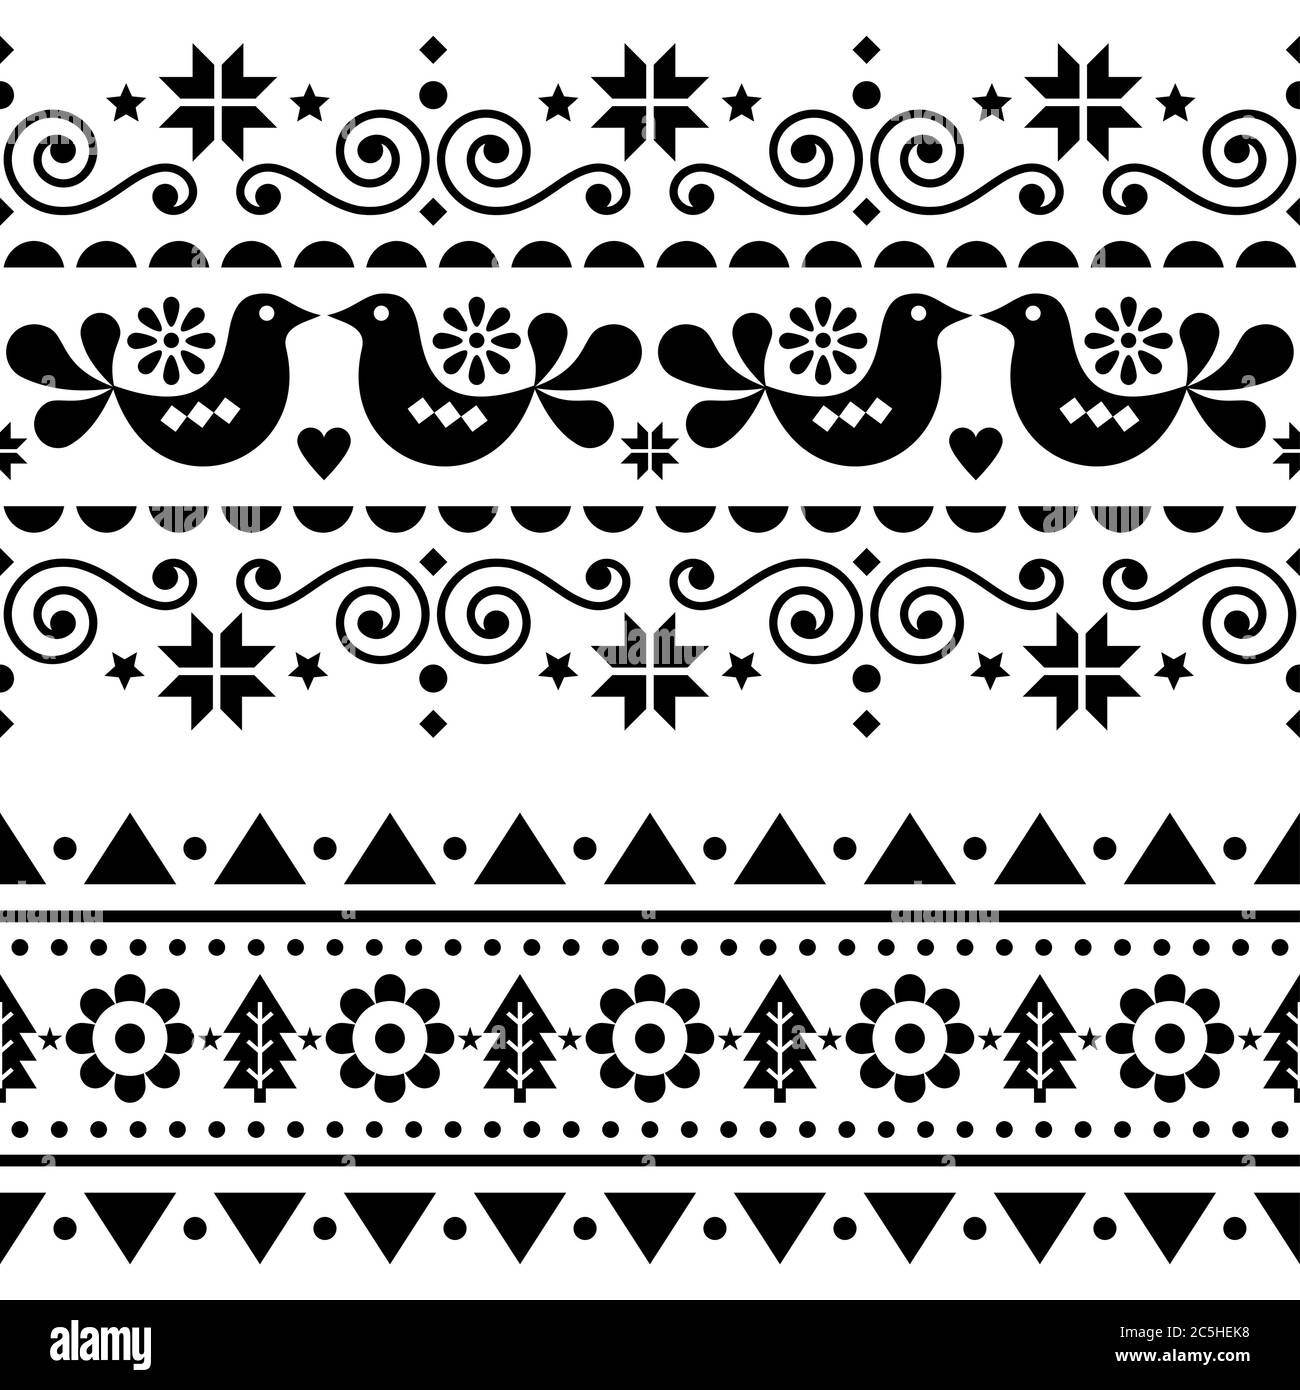 Scandinavian Christmas folk seamless vector long pattern, repetitive winter cute Nordic design with birds, Christmas trees, snowflakes and flowers Stock Vector